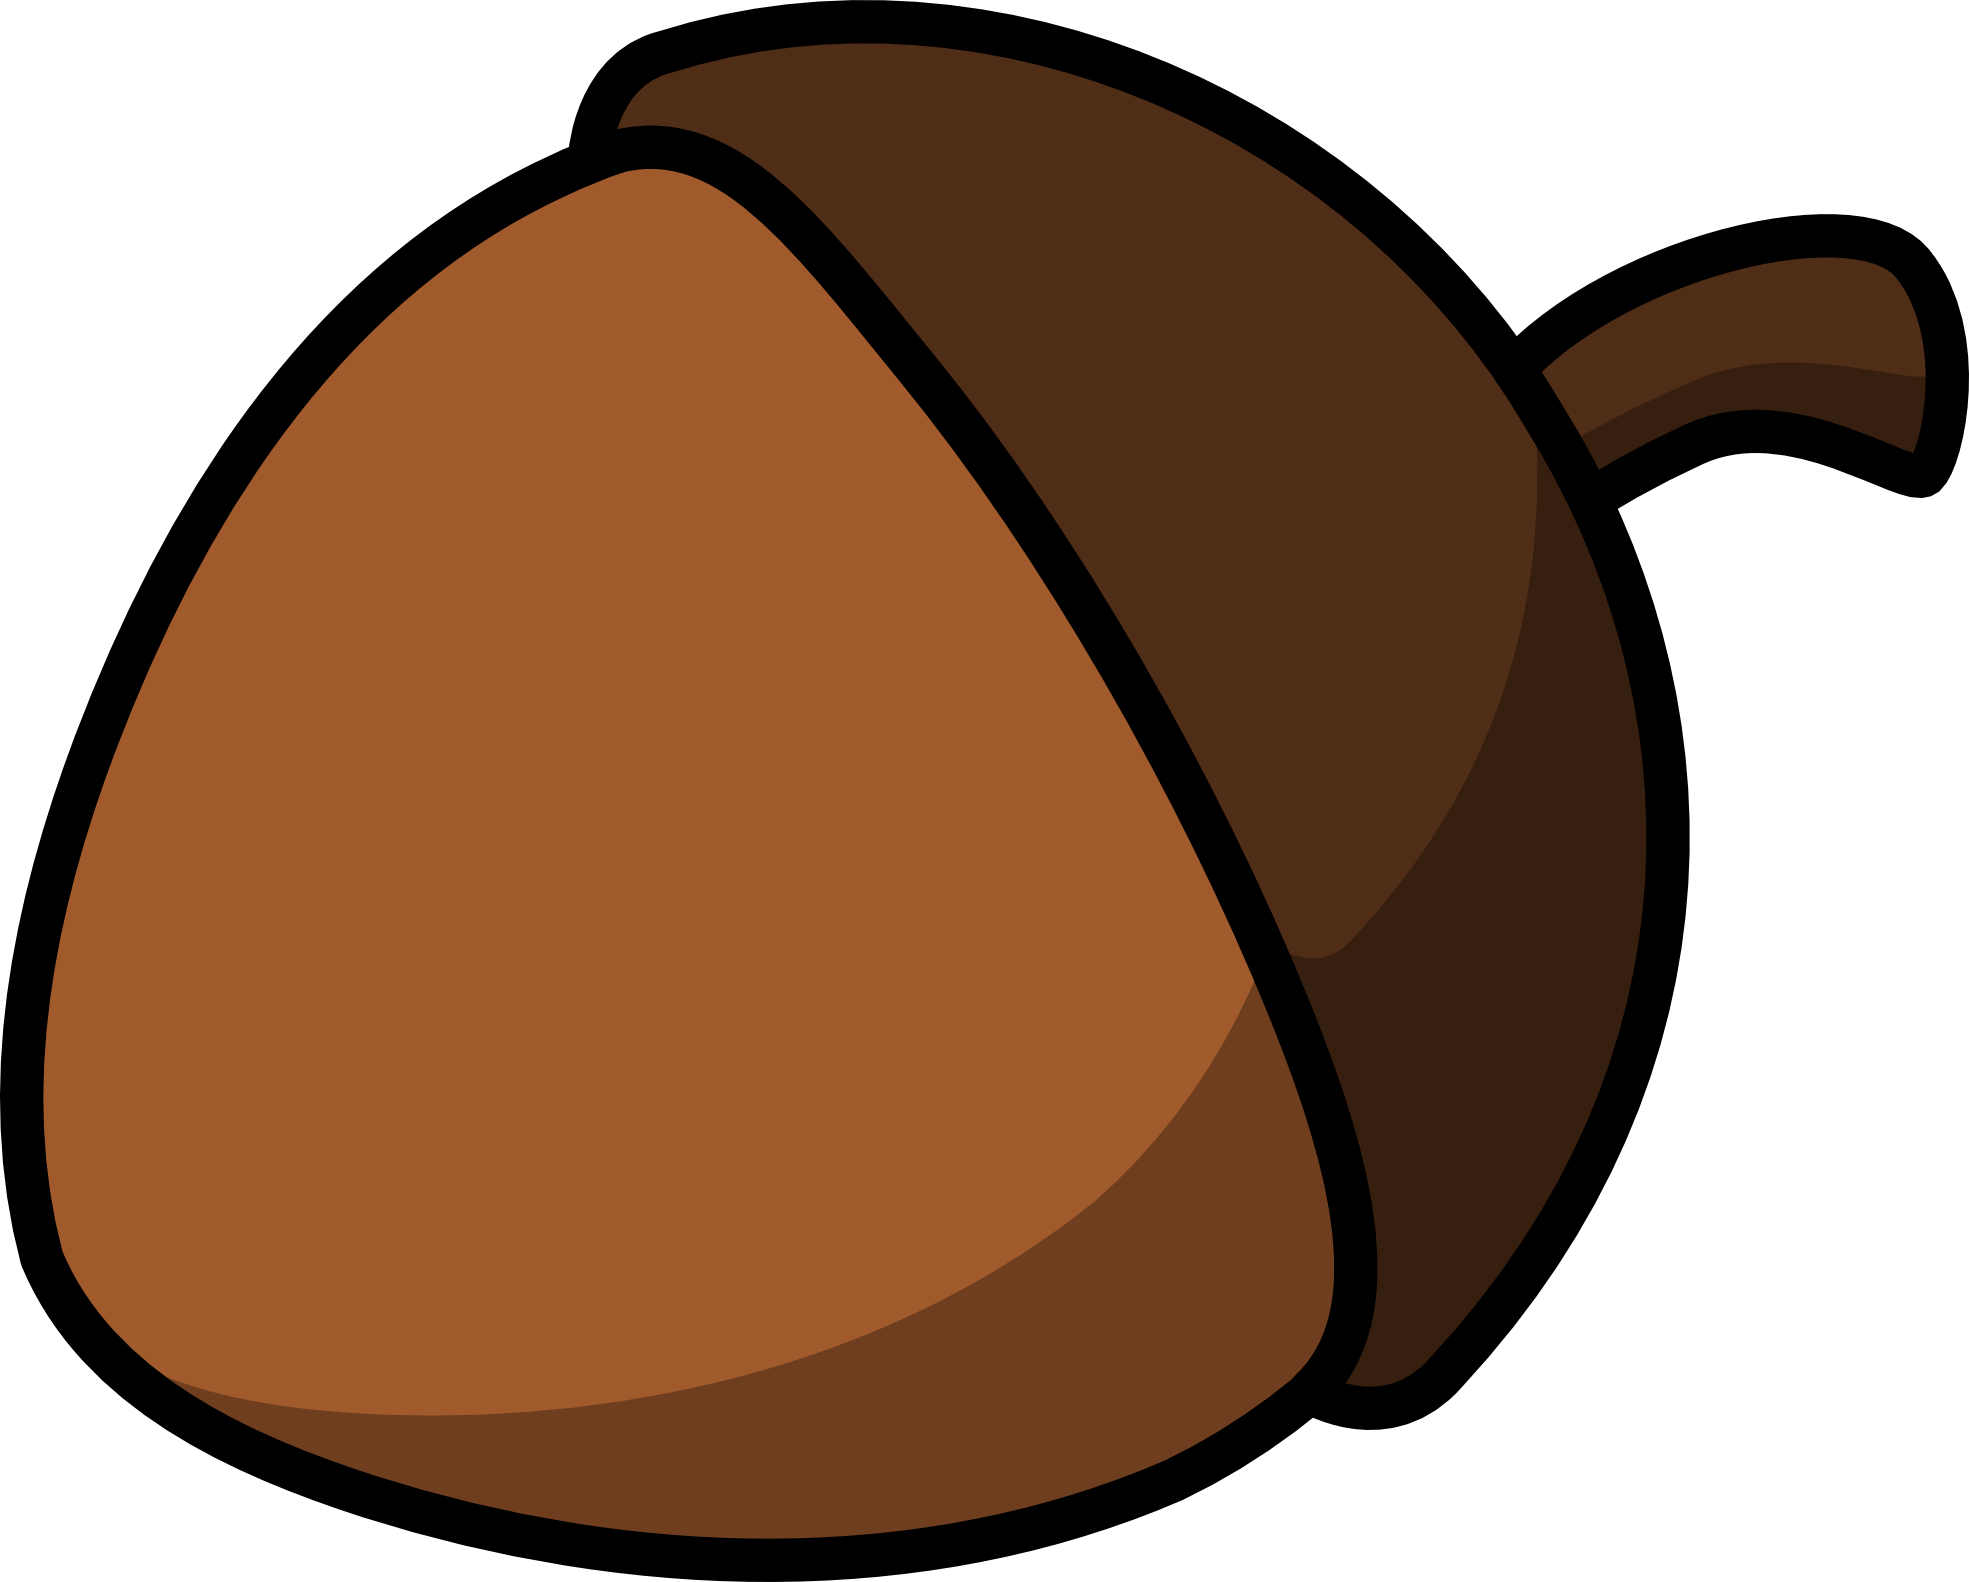 Acorn Clipart Black And White | Clipart Panda - Free Clipart Images